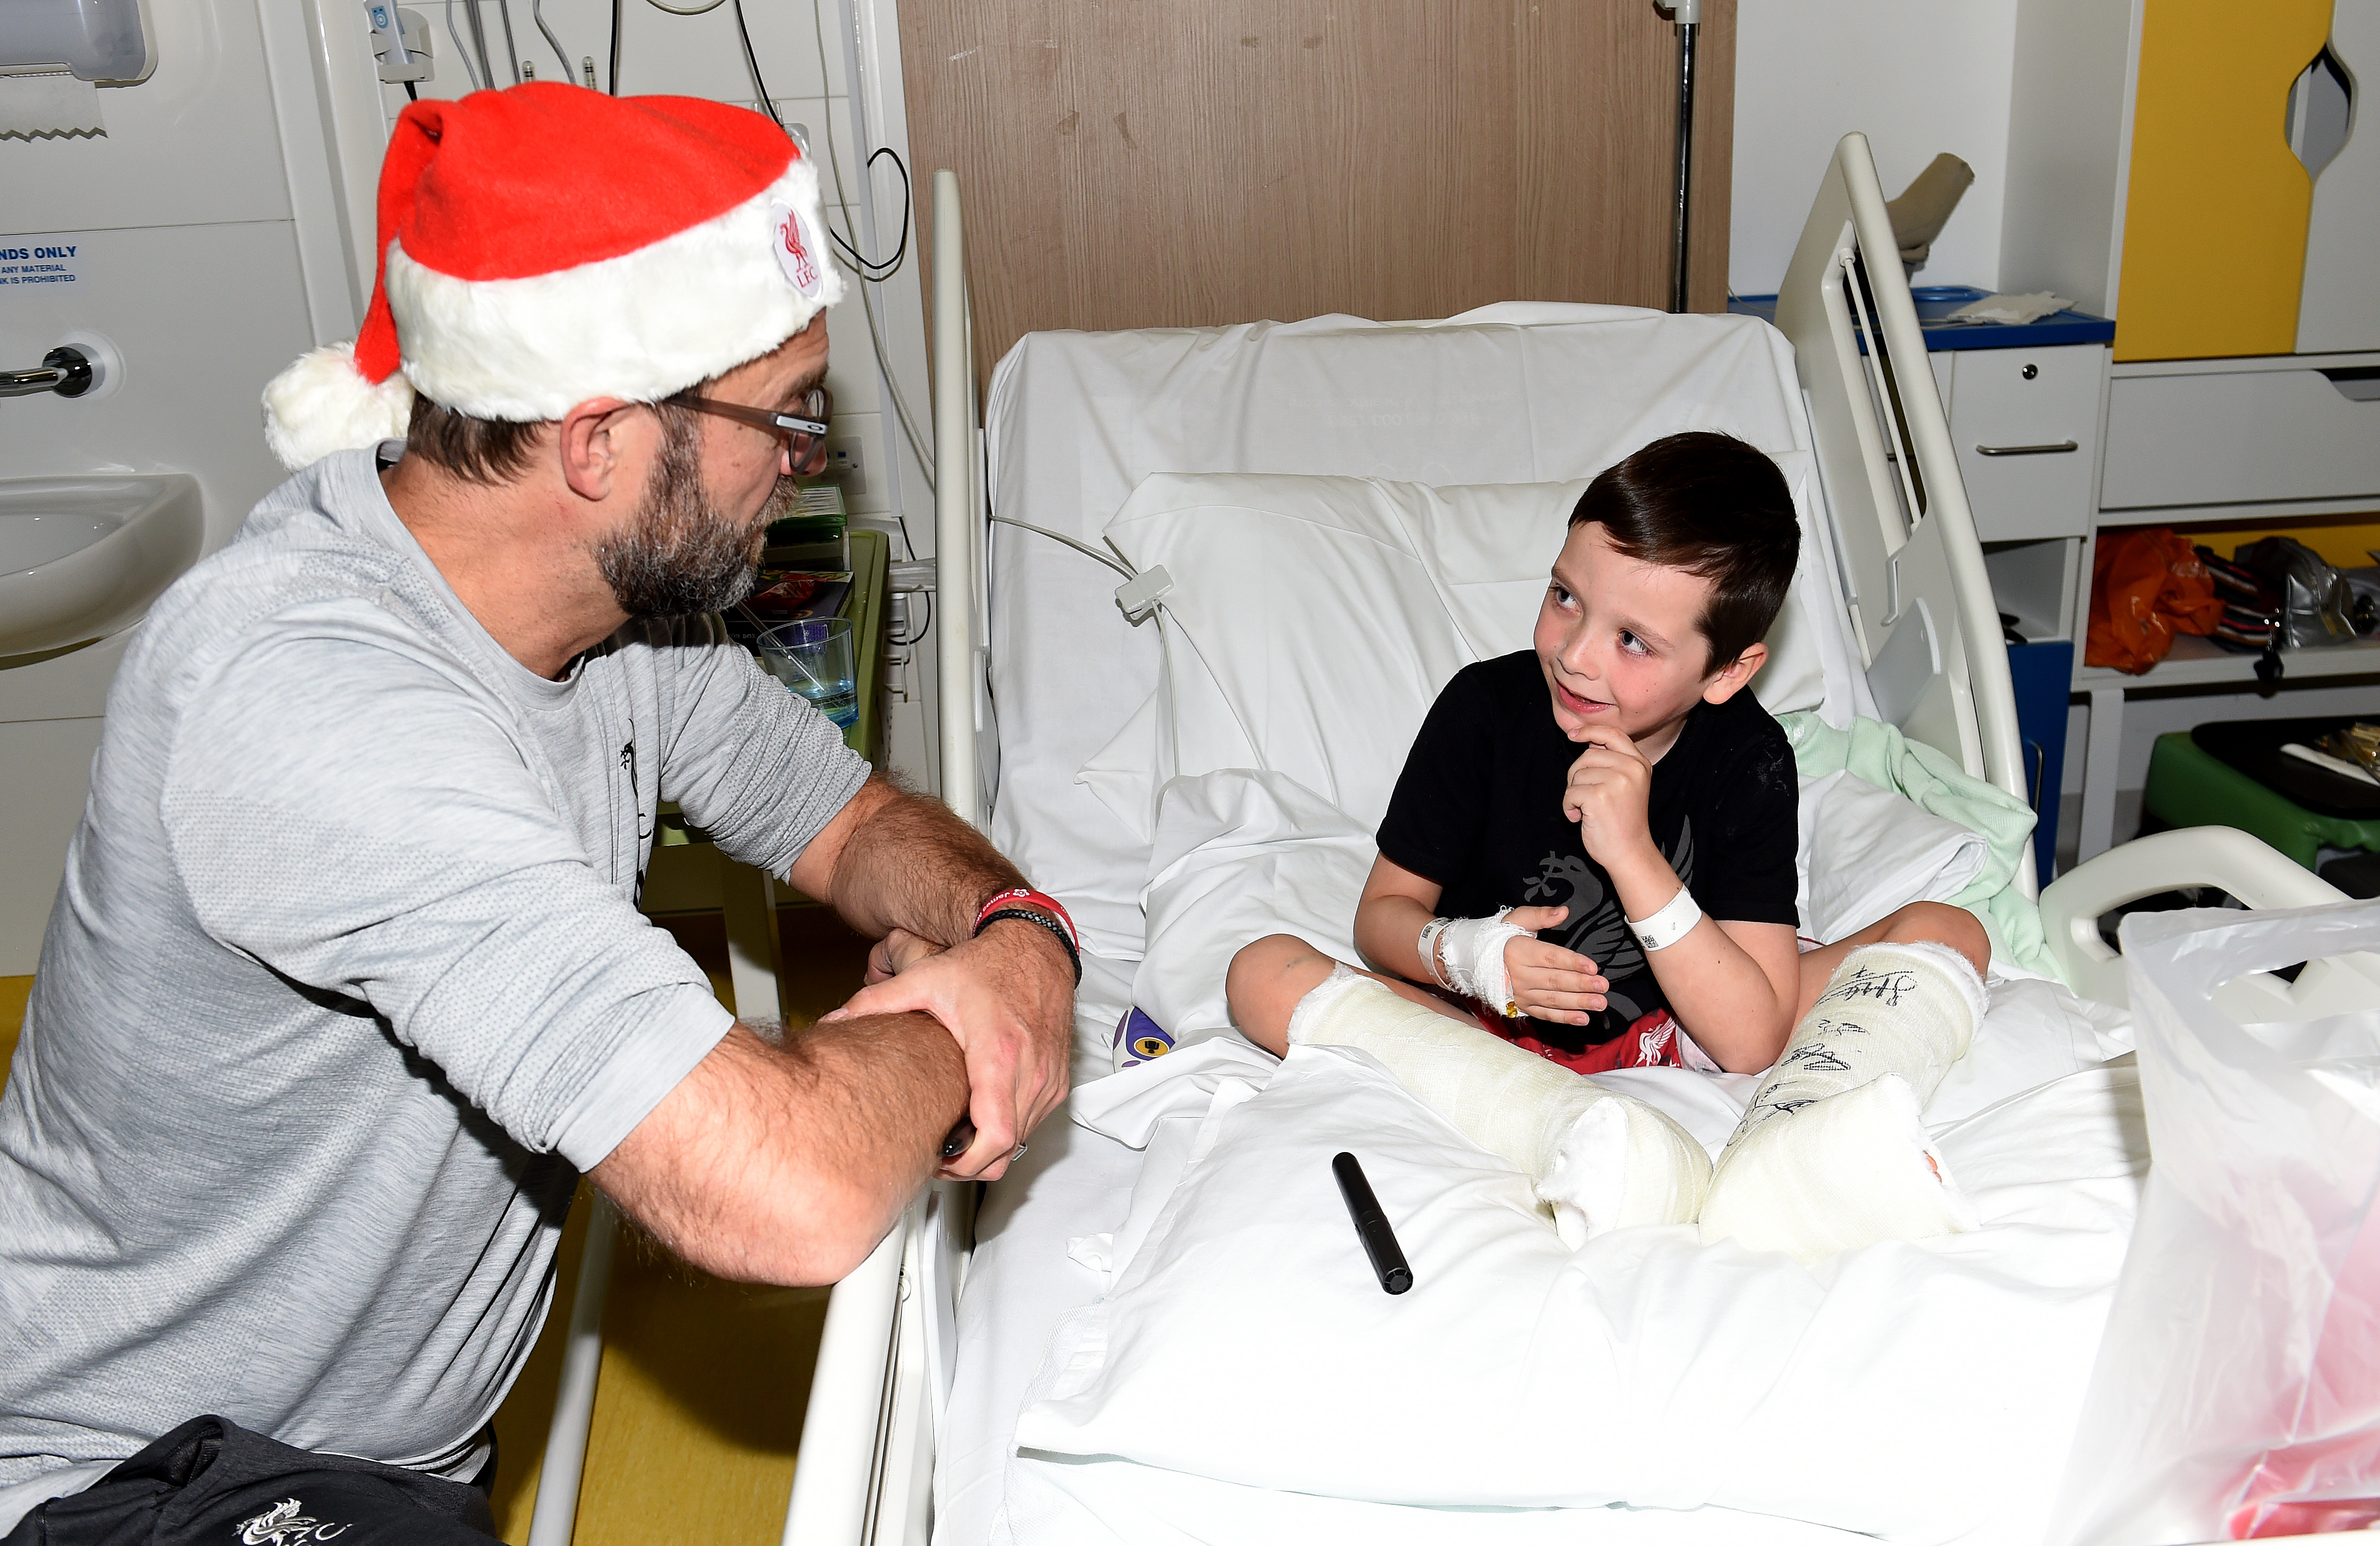 Liverpool Players Deliver Christmas Gifts to Alder Hey Hospital